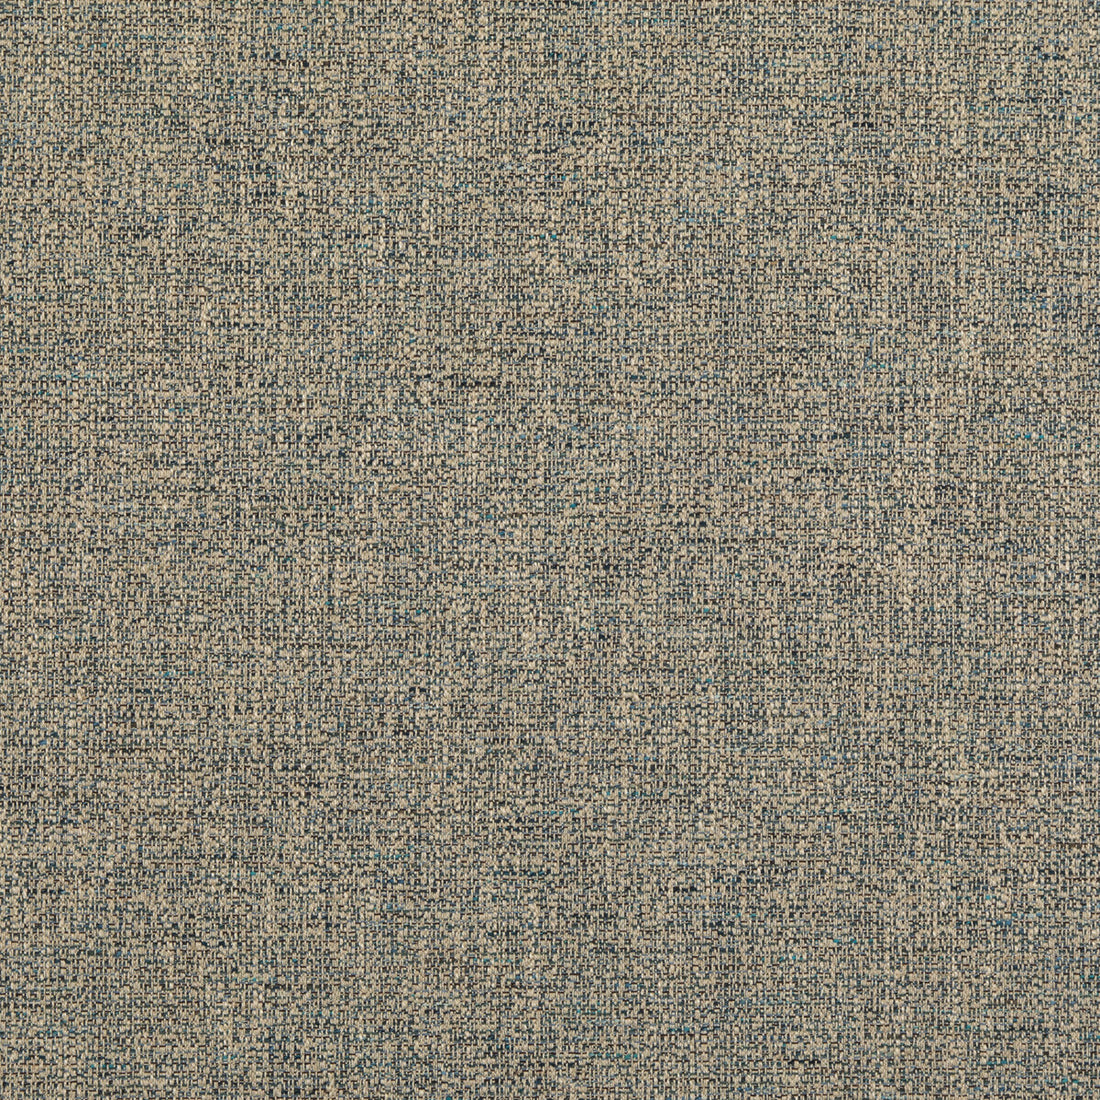 Alveston fabric in teal color - pattern BF10881.615.0 - by G P &amp; J Baker in the Essential Colours II collection